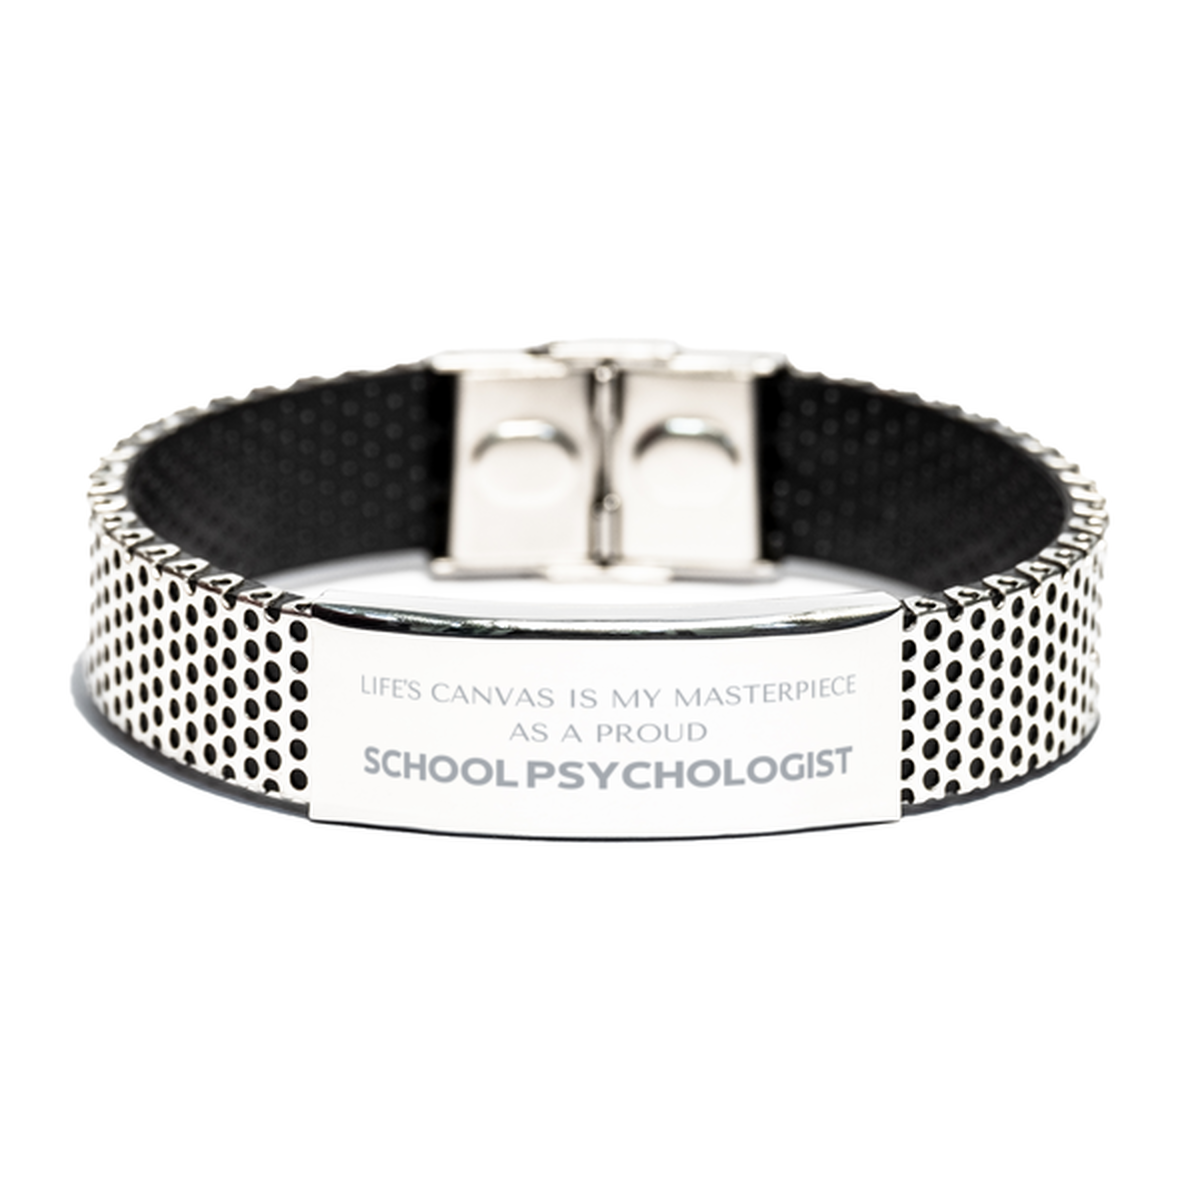 Proud School Psychologist Gifts, Life's canvas is my masterpiece, Epic Birthday Christmas Unique Stainless Steel Bracelet For School Psychologist, Coworkers, Men, Women, Friends